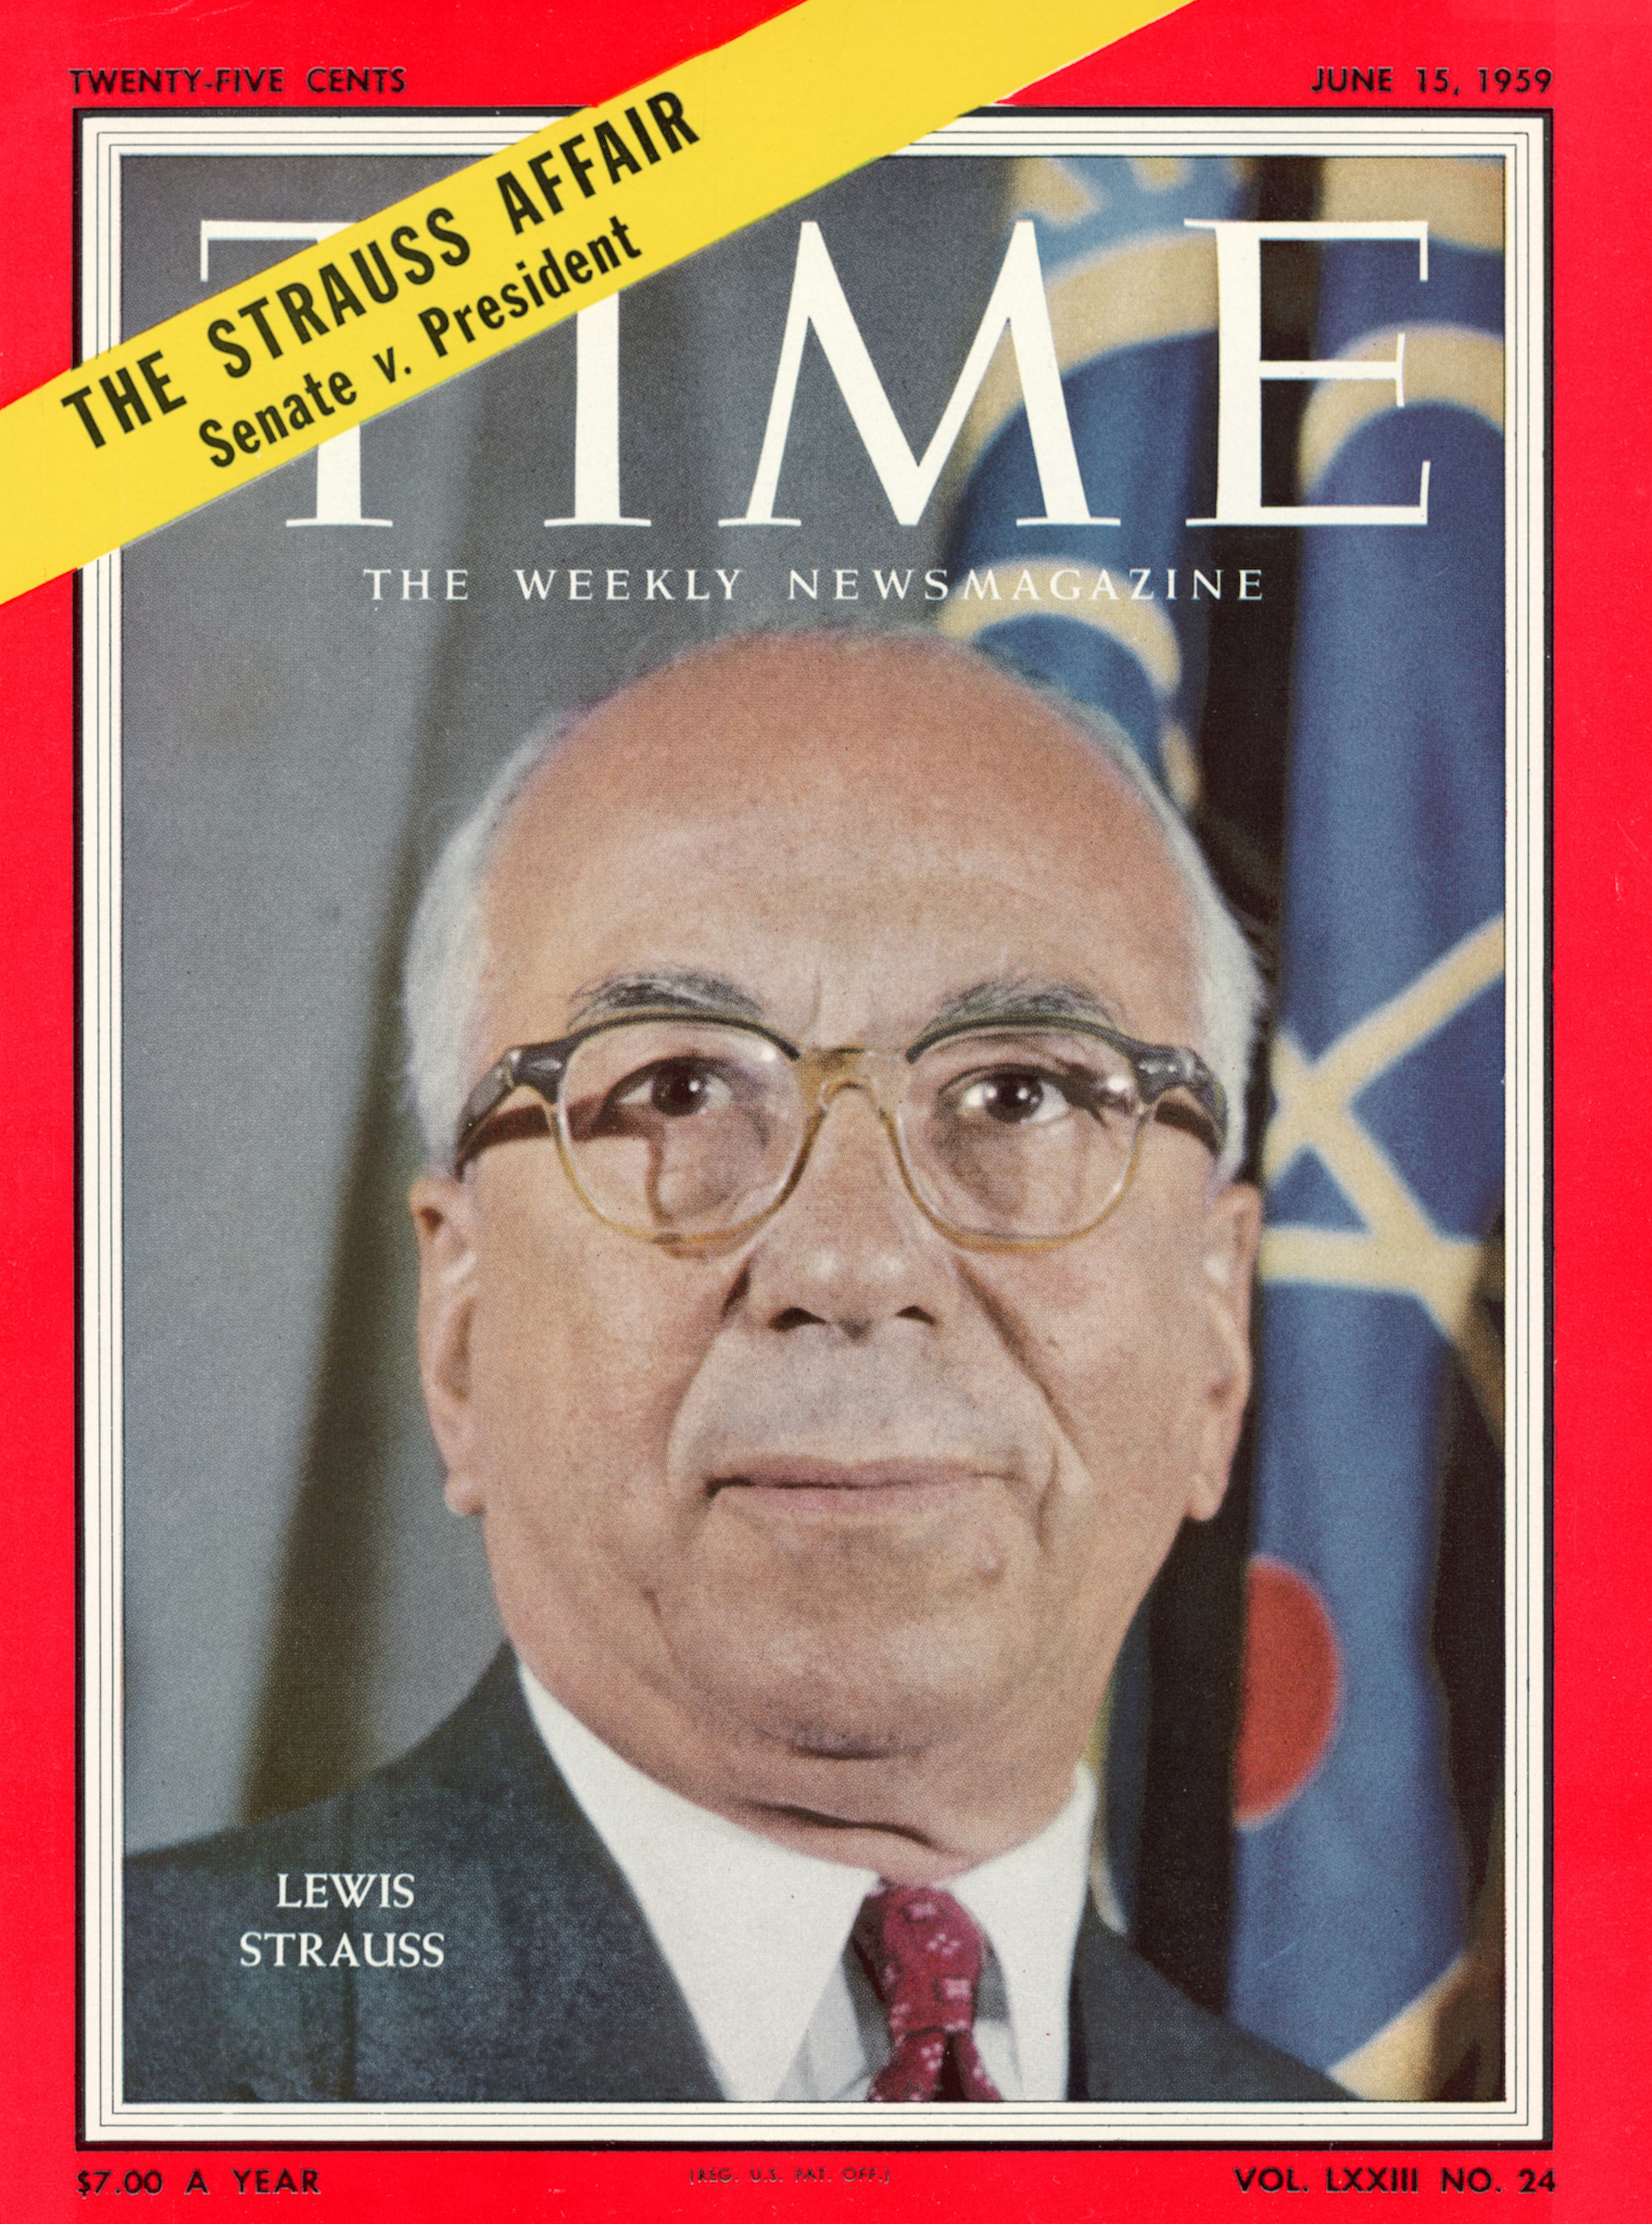 Real TIME magazine covers appear on Oppenheimer